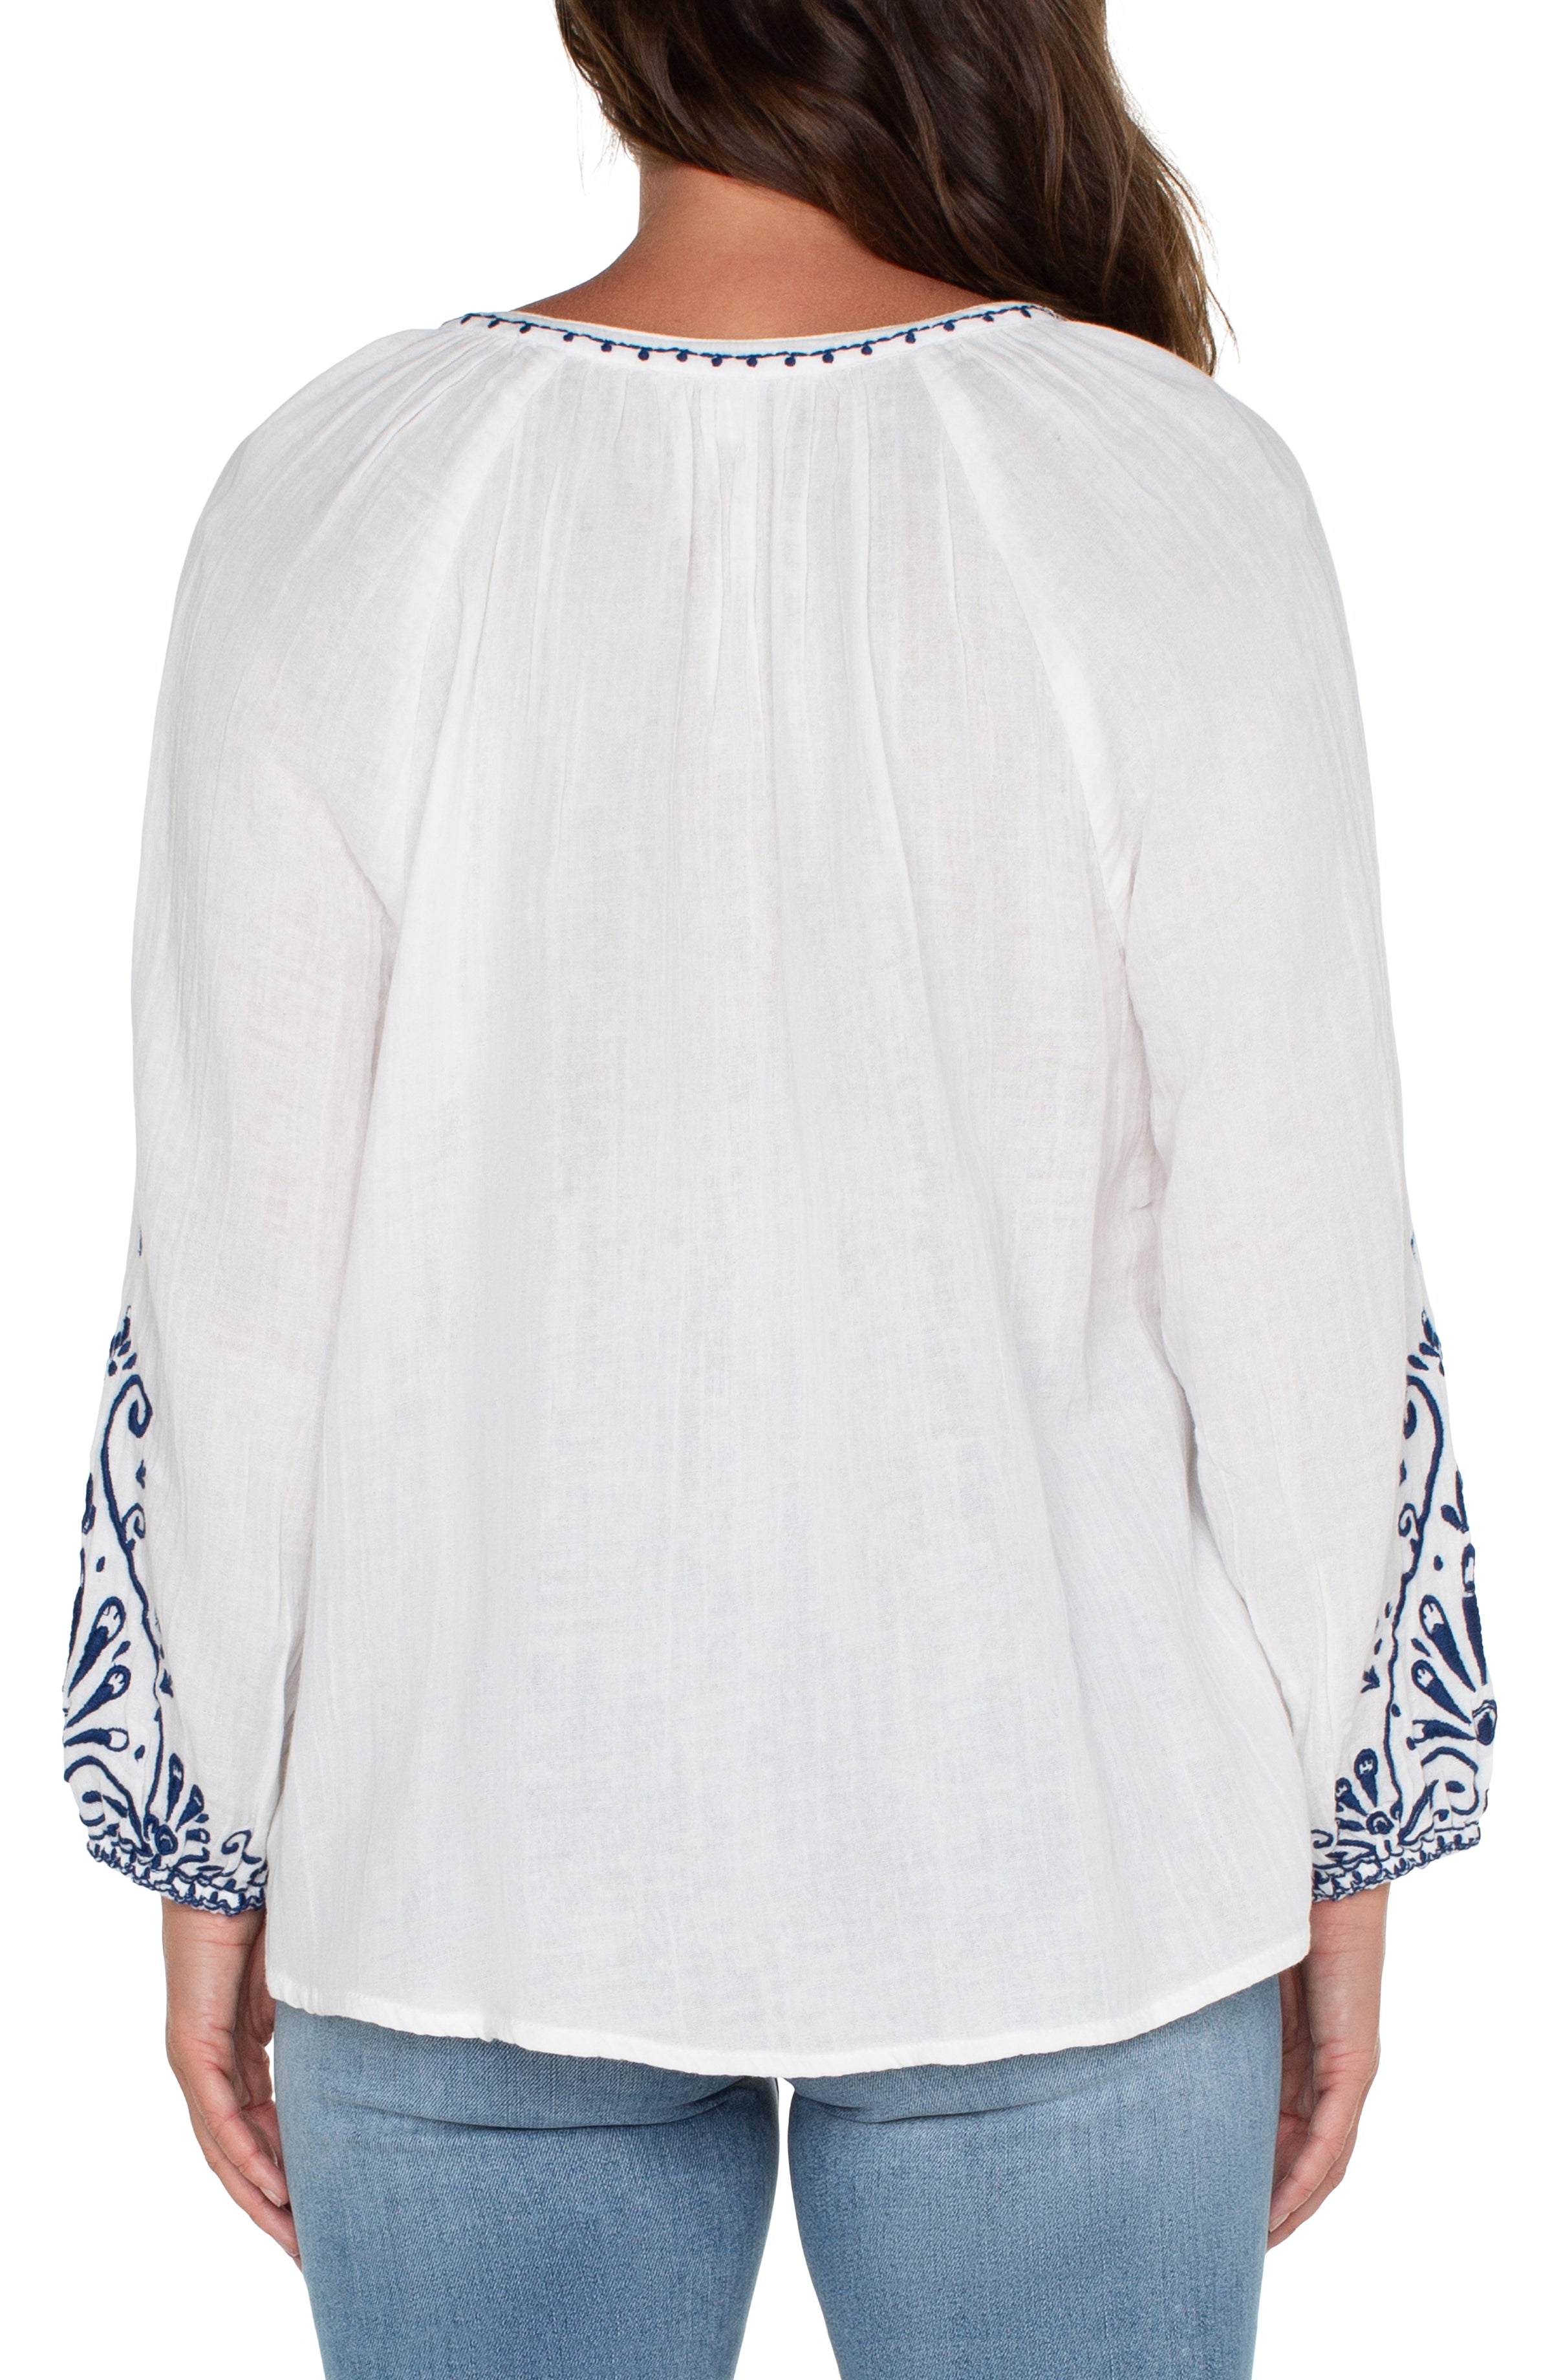 LVP Long Sleeve Embroidered Top - Off White Back View